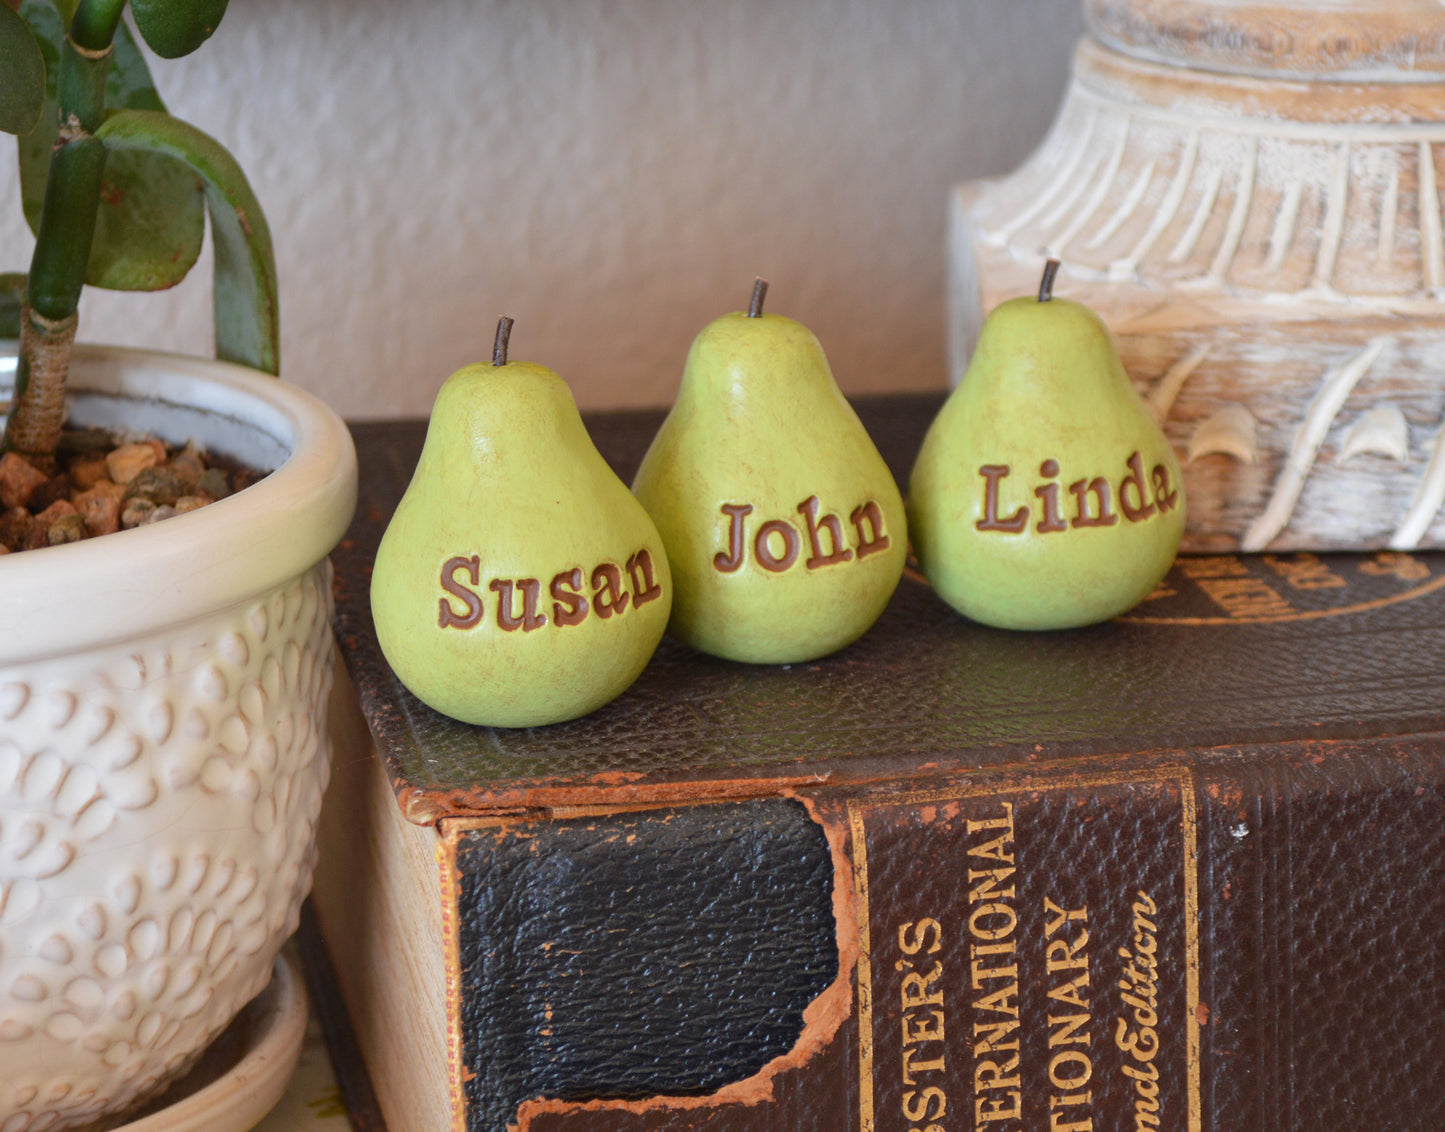 Custom words vintage green pears / Any words you want / Bespoke text gift / FREE SHIPPING